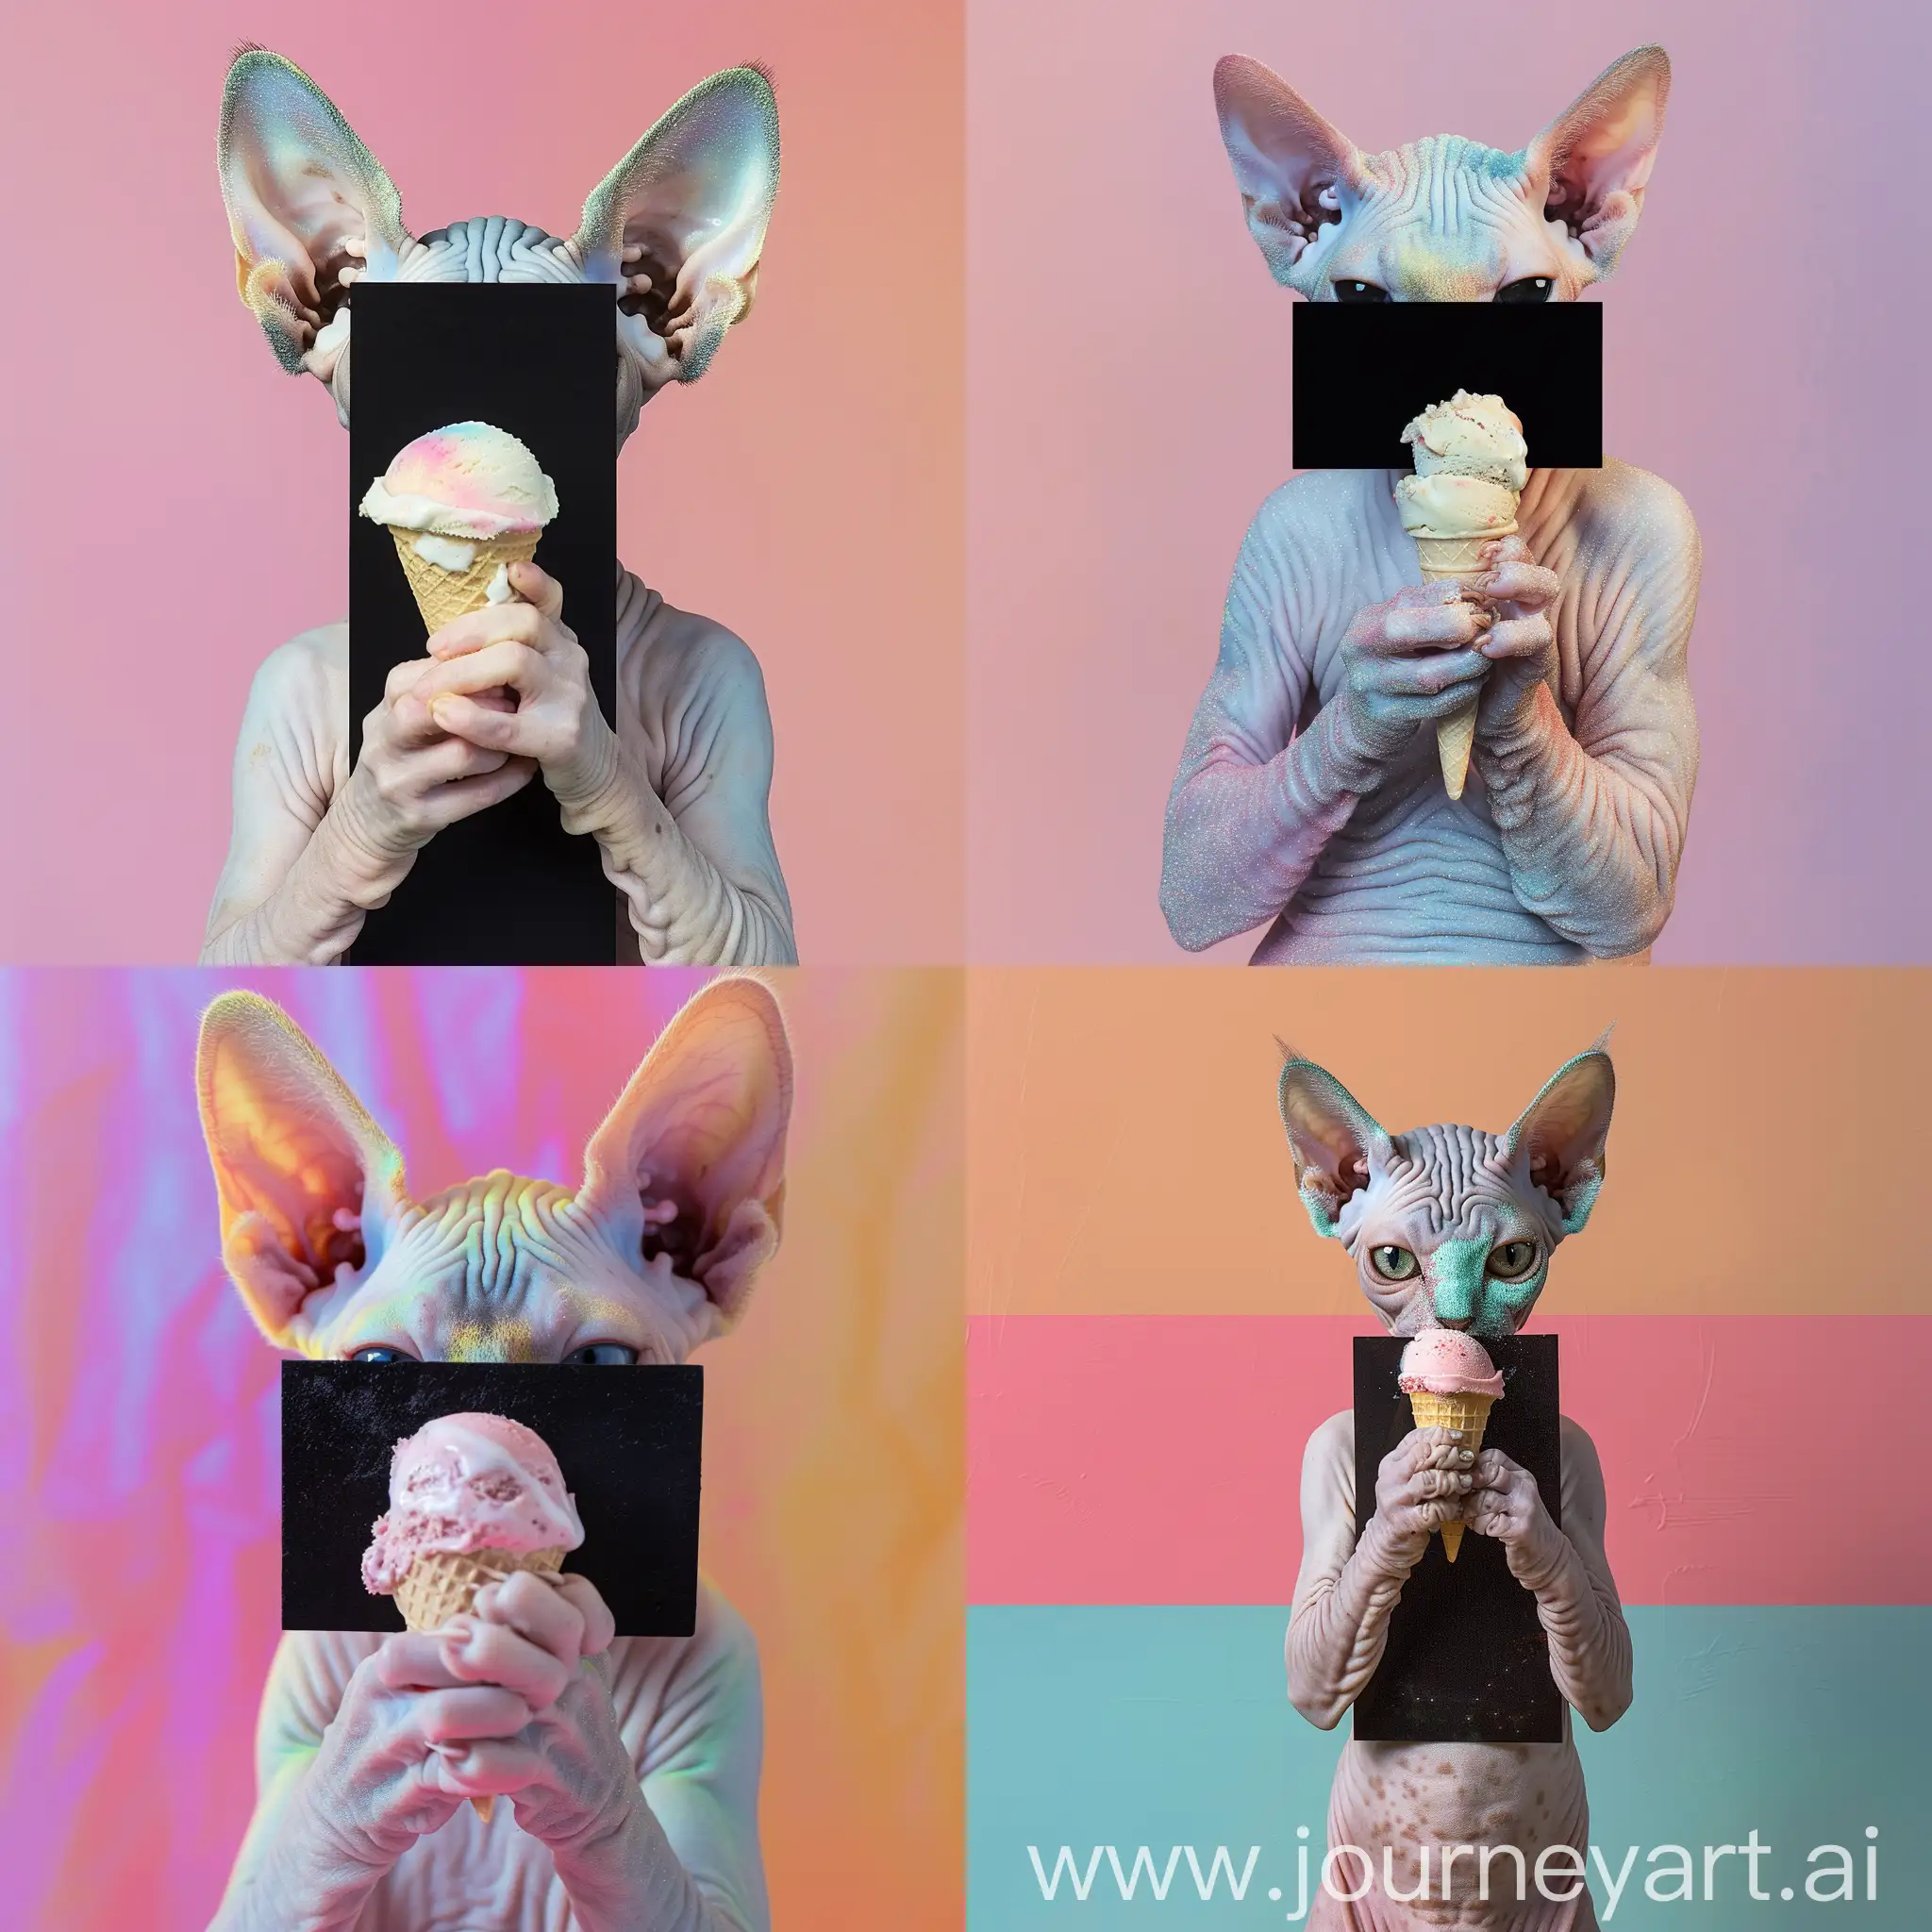 Sphynx-Cat-Eating-Ice-Cream-in-Hieronymus-Bosch-Style-Collage